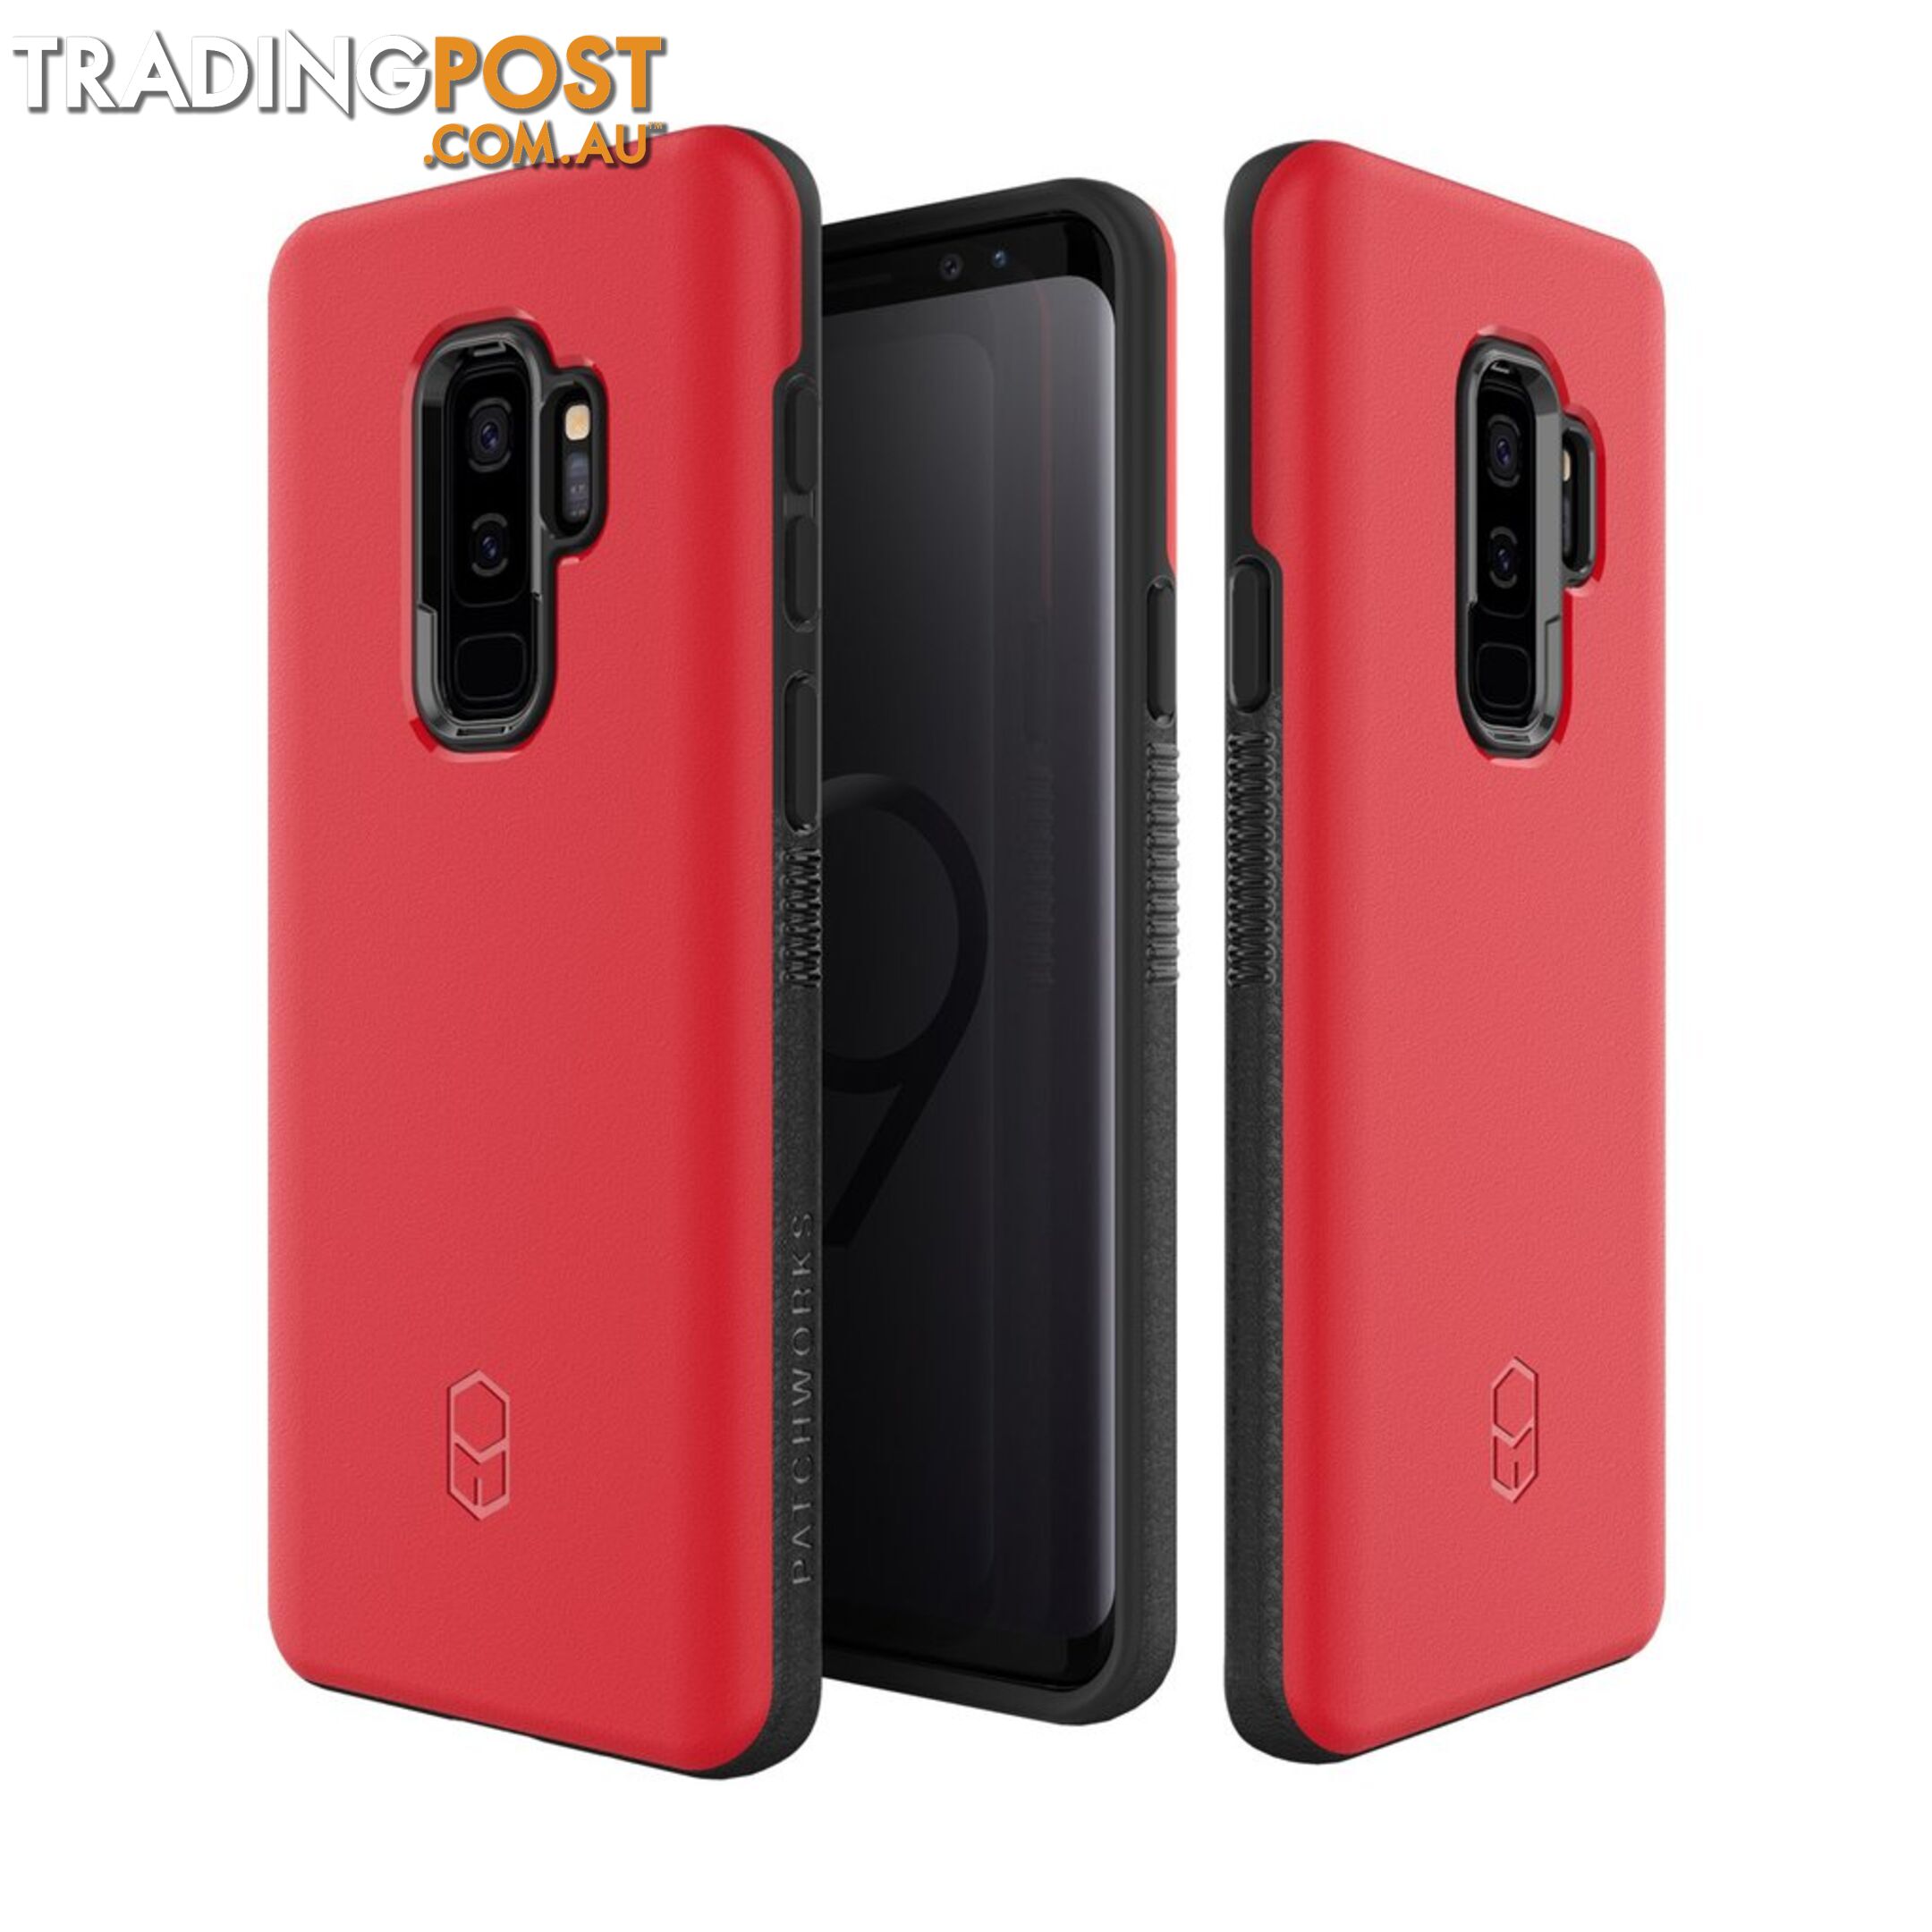 Patchworks ITG Level Rugged Case for Samsung Galaxy S9 - Red - 8809597090102/LIS92 - Patchworks